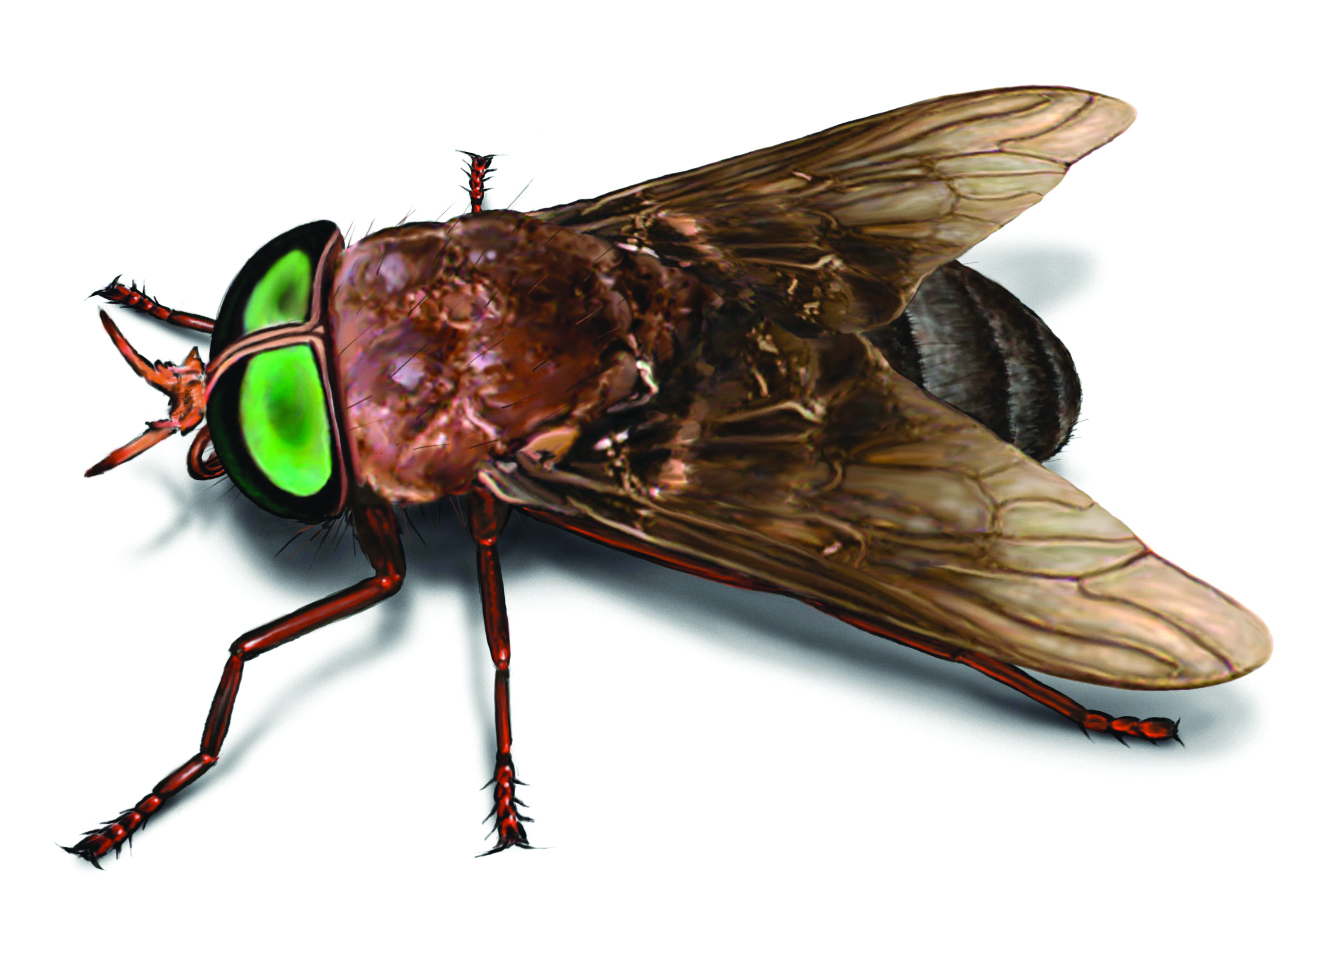 Horse Fly Control Get Rid Of Horse Flies In The House